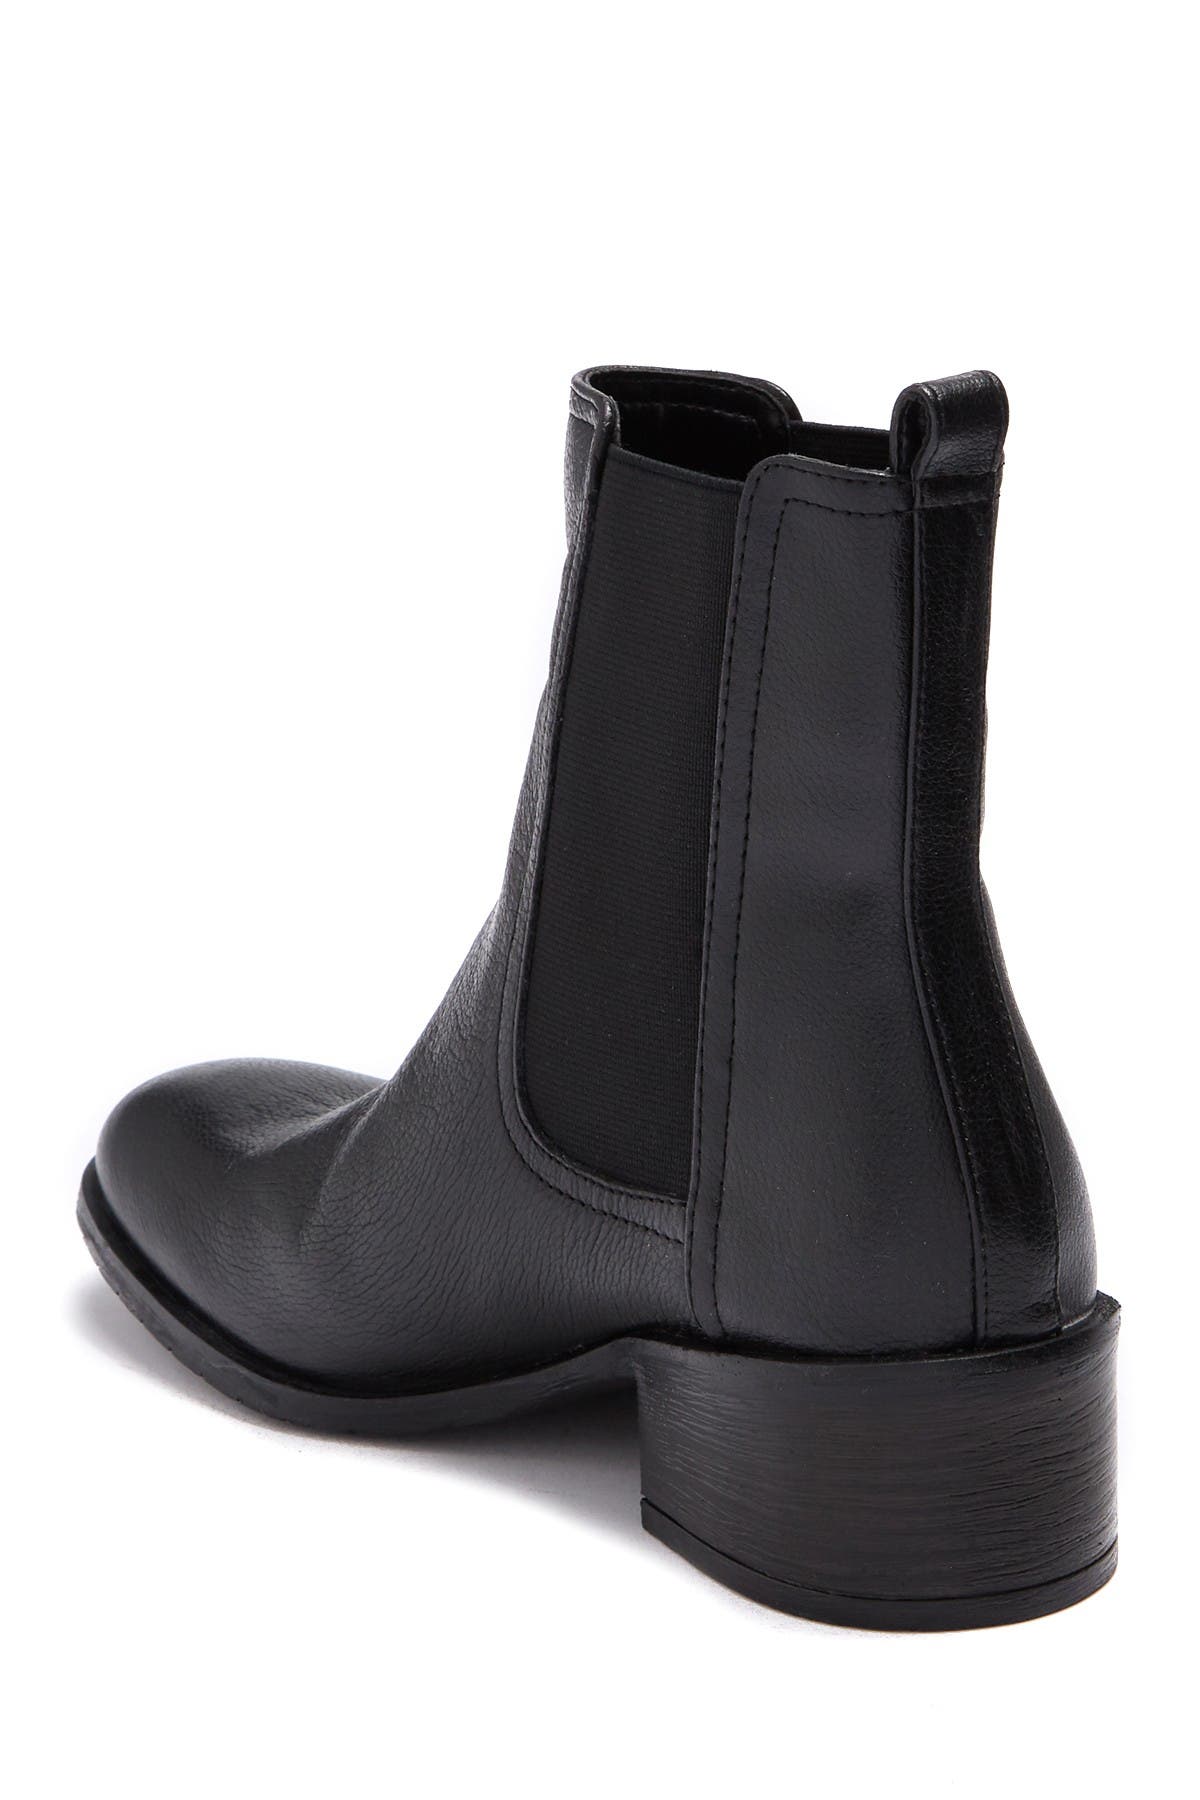 kenneth cole black booties